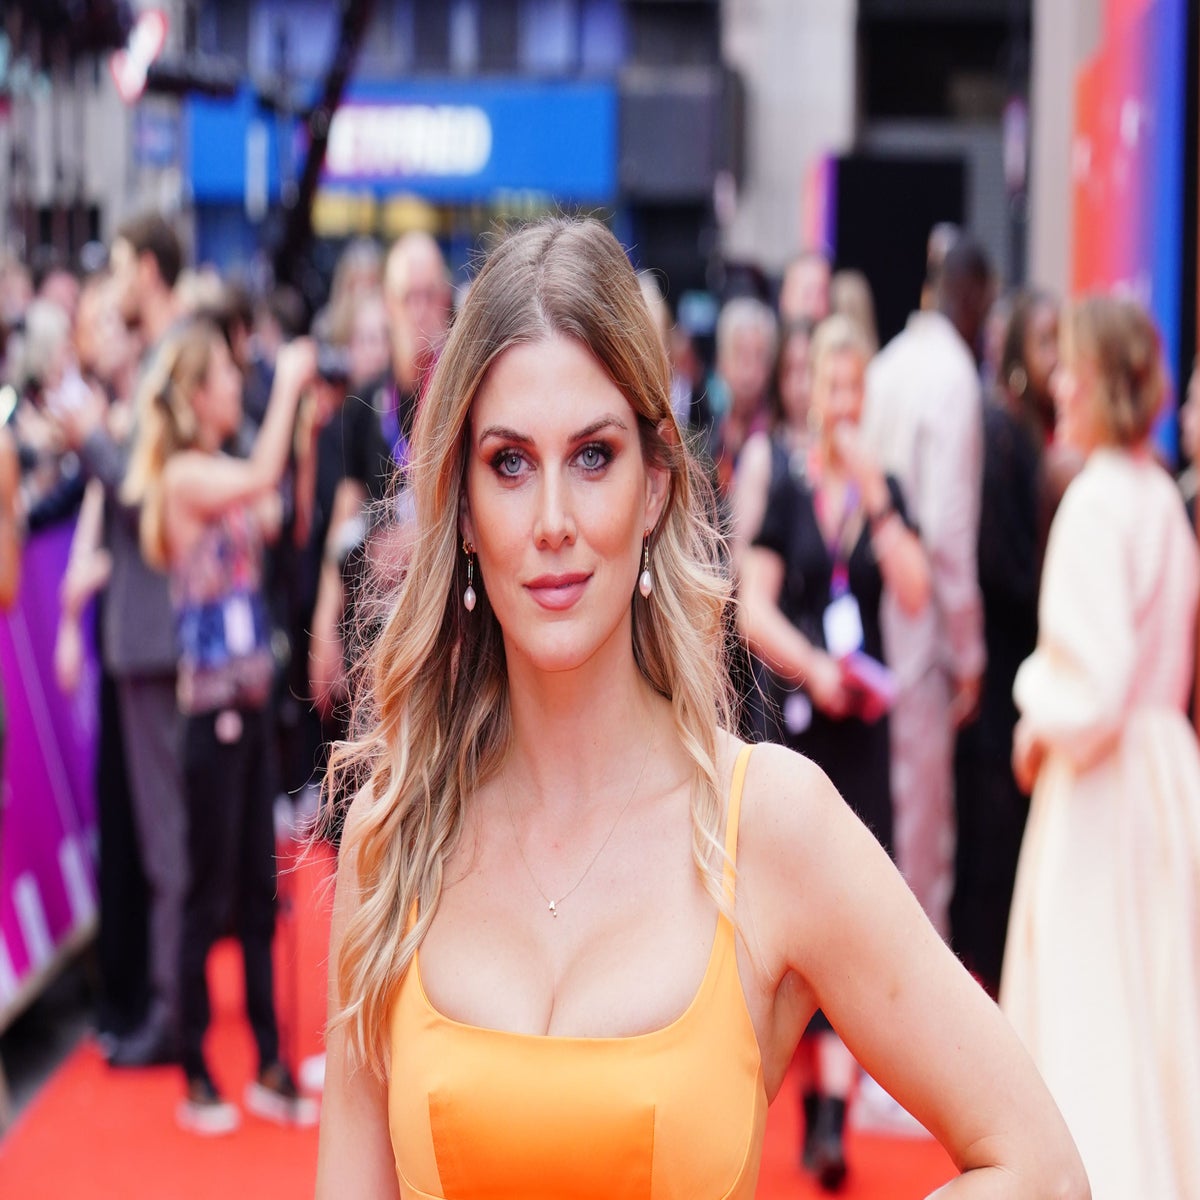 Ashley James admits she's 'anxious' about breastfeeding because of